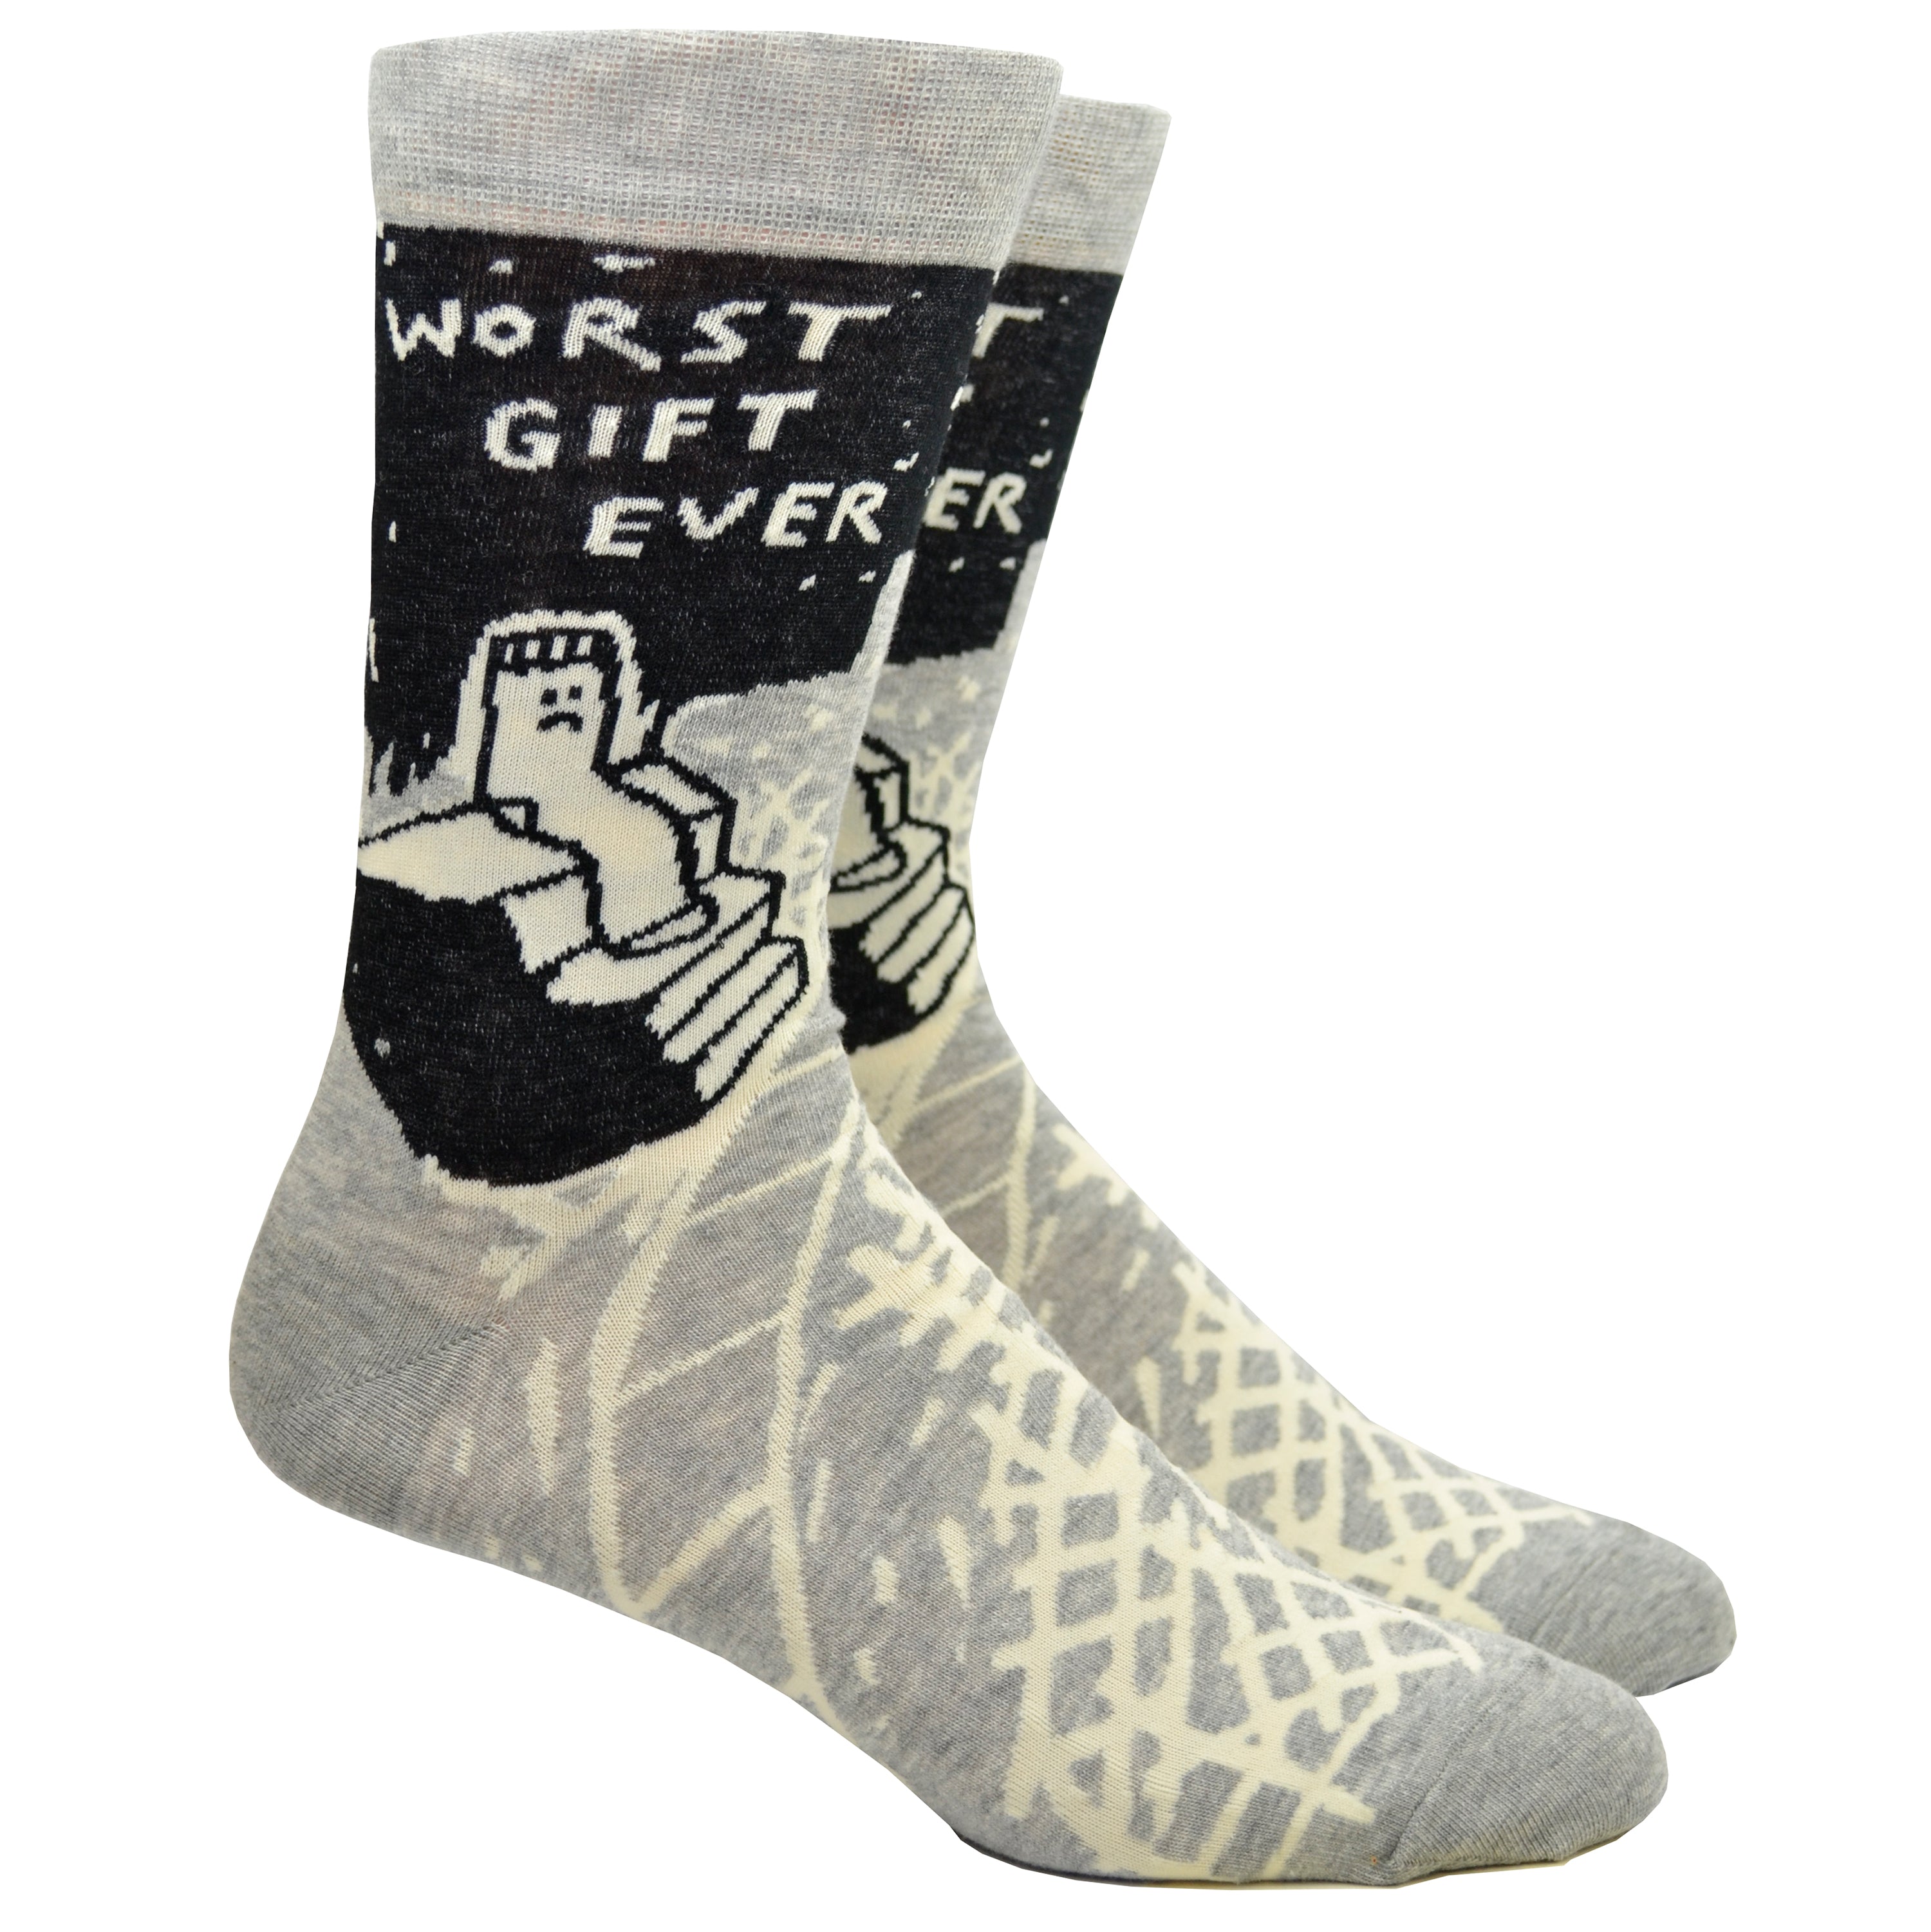 Shown on leg forms, a pair of Blue Q brand men's cotton crew socks in grey and black with an abstract crisscross design along the foot and a sad sock sitting on stairs on the leg. The text on the sock reads, 